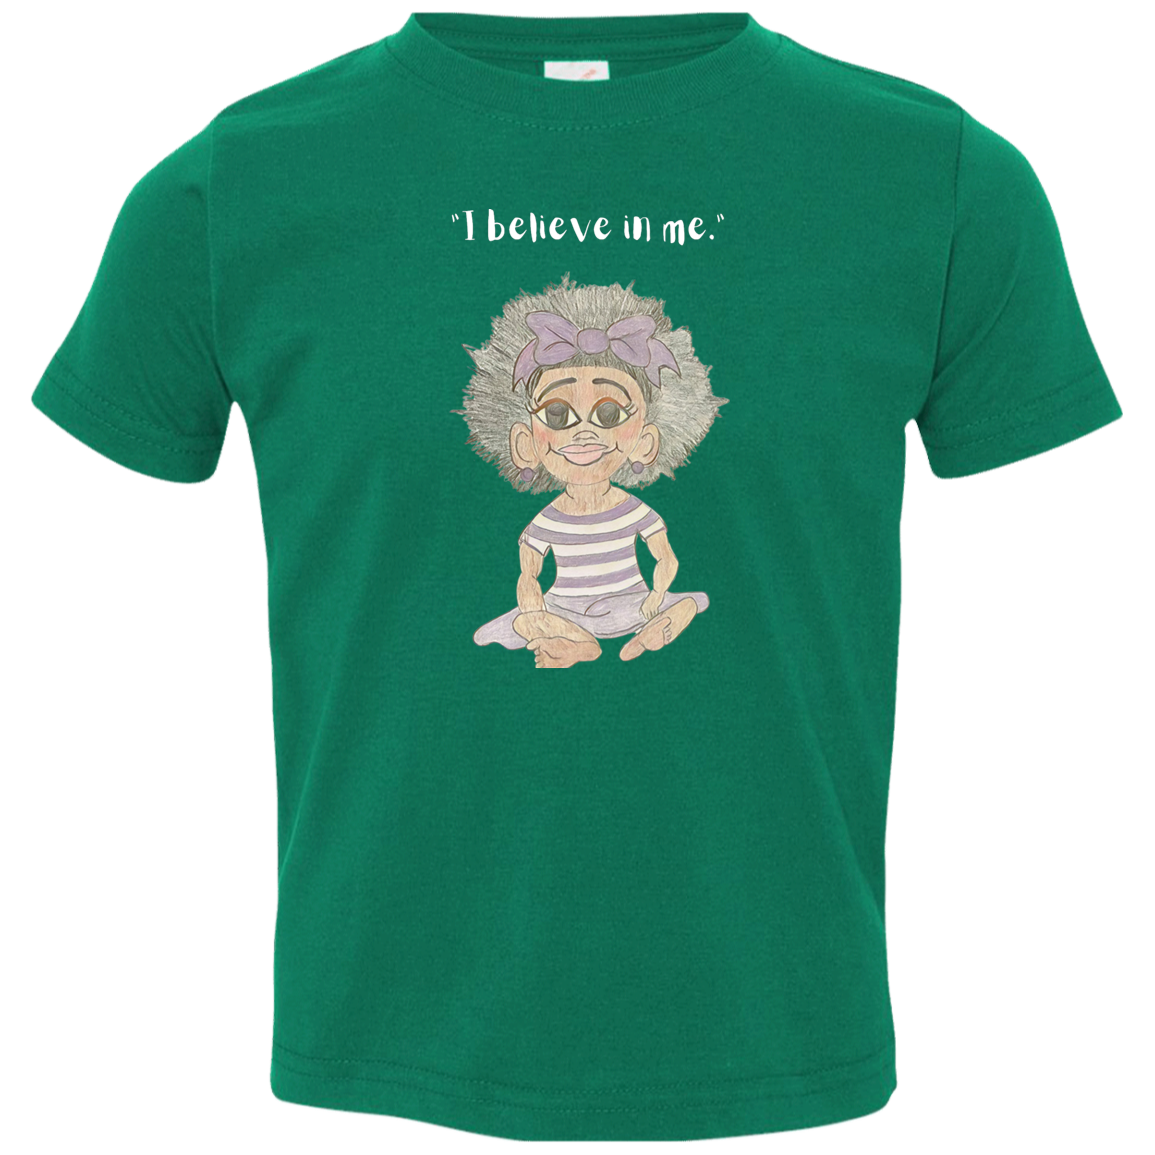 I believe in me Toddler Jersey T-Shirt